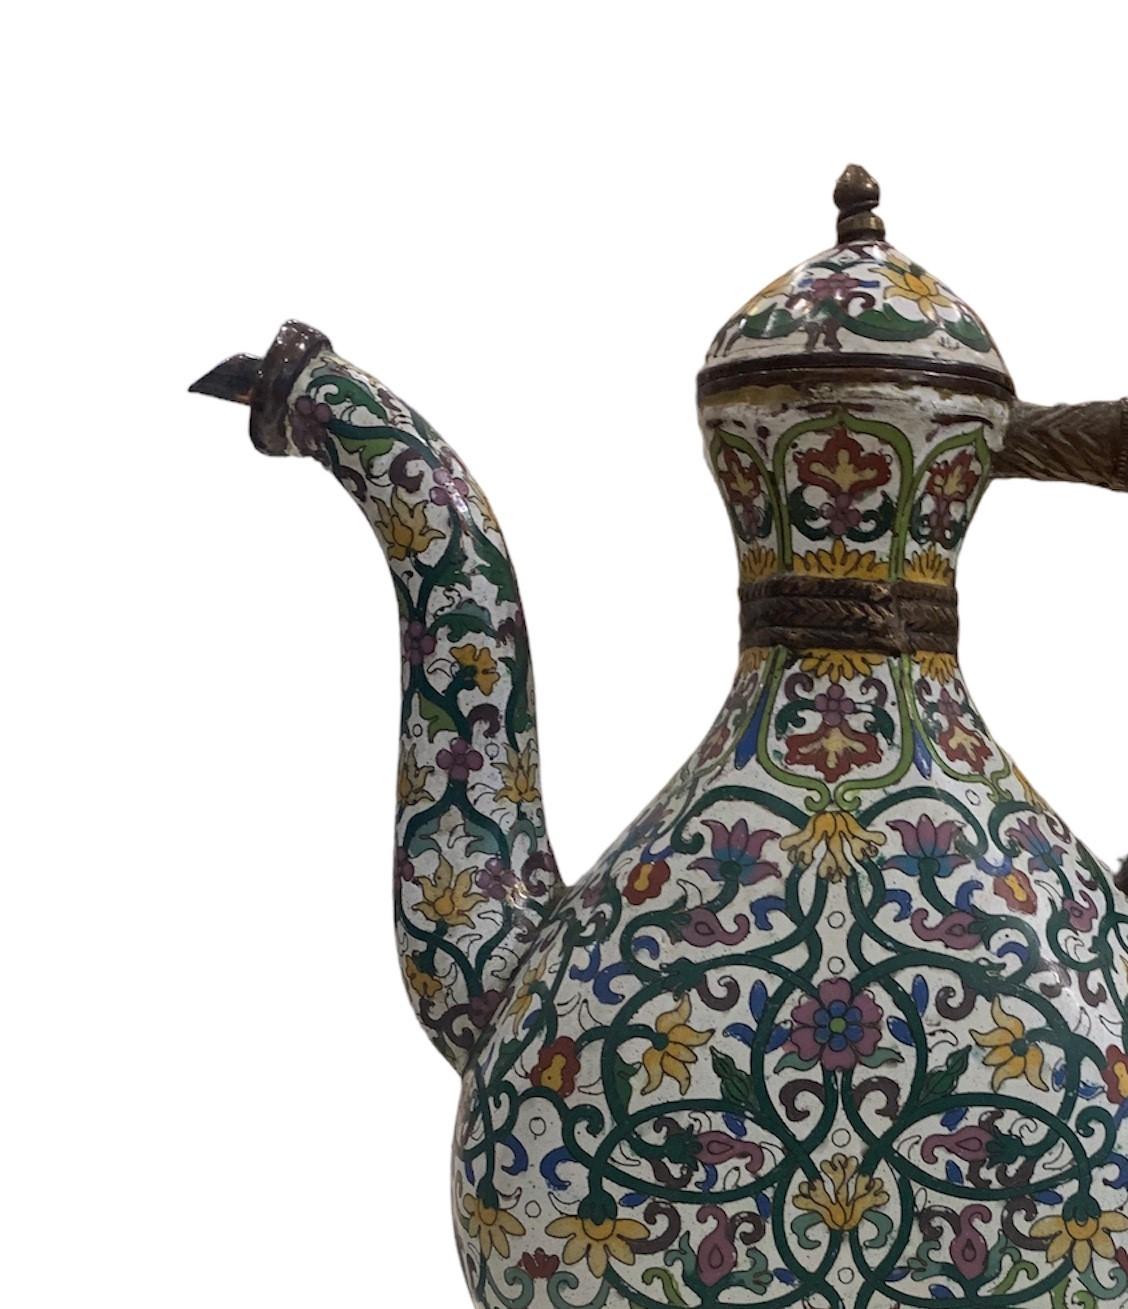 The antique brass Mughal ewer is a magnificent piece of art and craftsmanship that reflects the opulence and grandeur of the Mughal Empire. This ewer, originating from the Mughal period, is made primarily of brass, a durable and richly colored metal